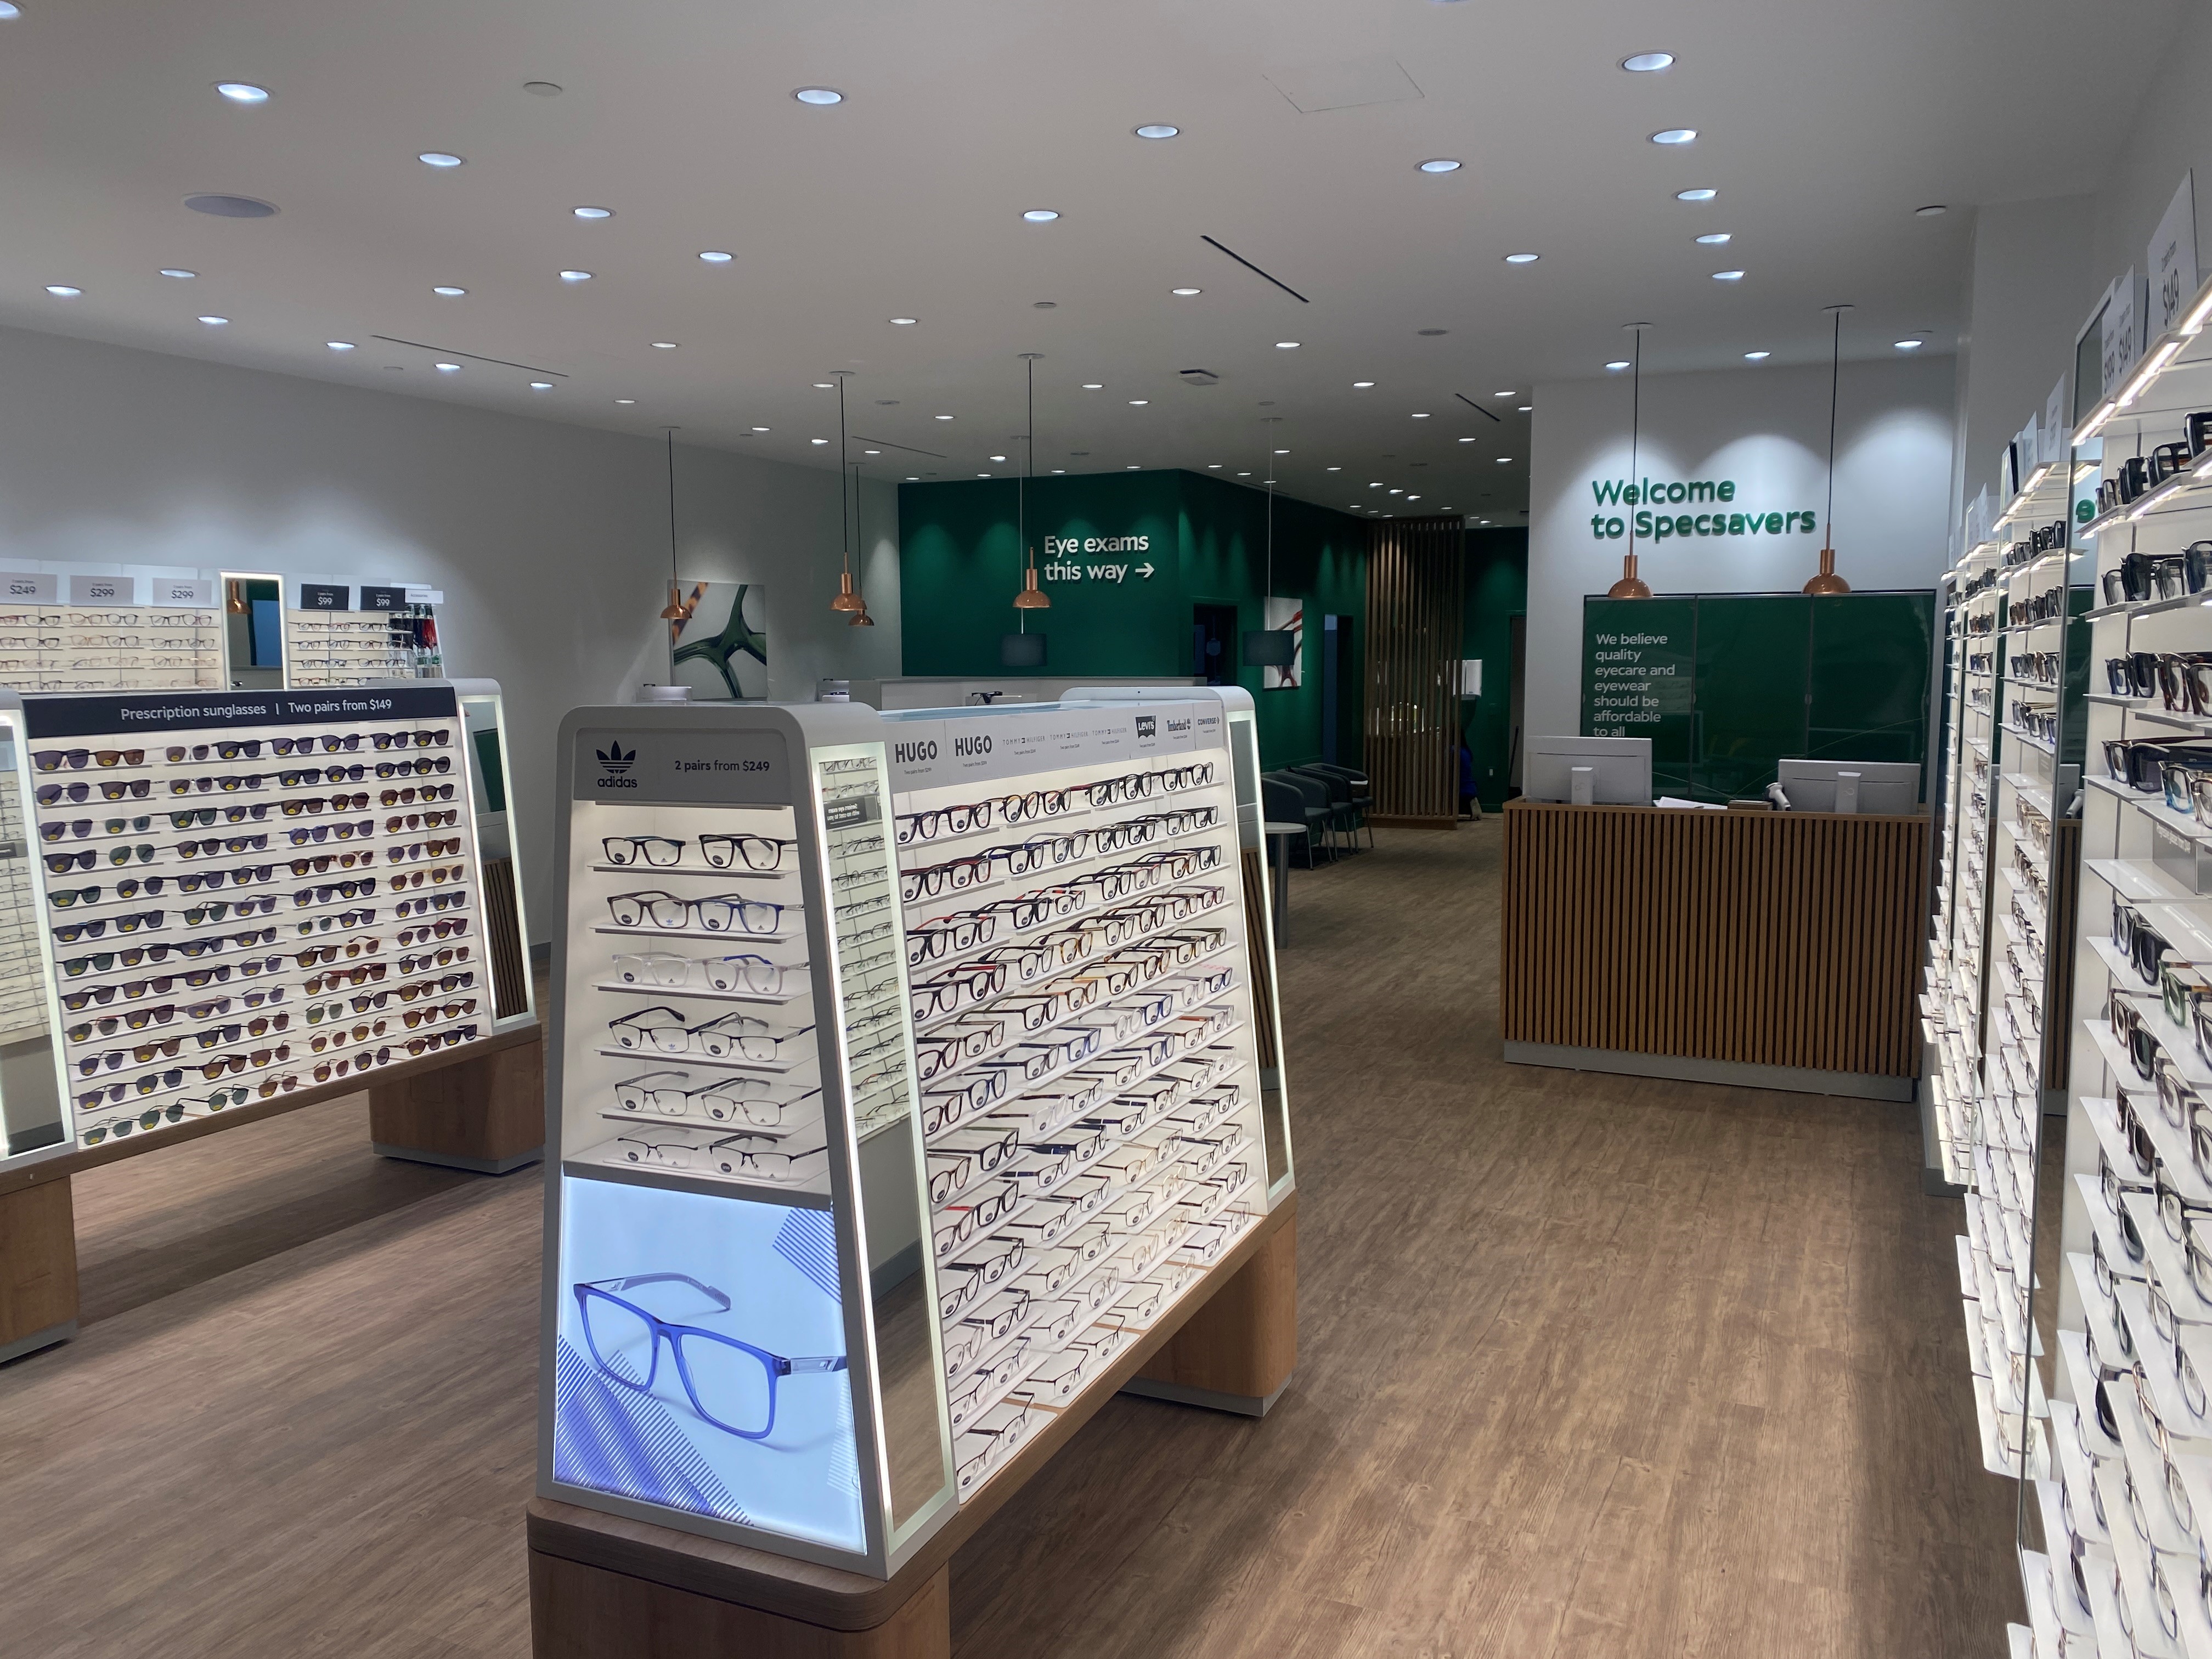 Specsavers The Pen Centre St. Catharines (905)225-1569